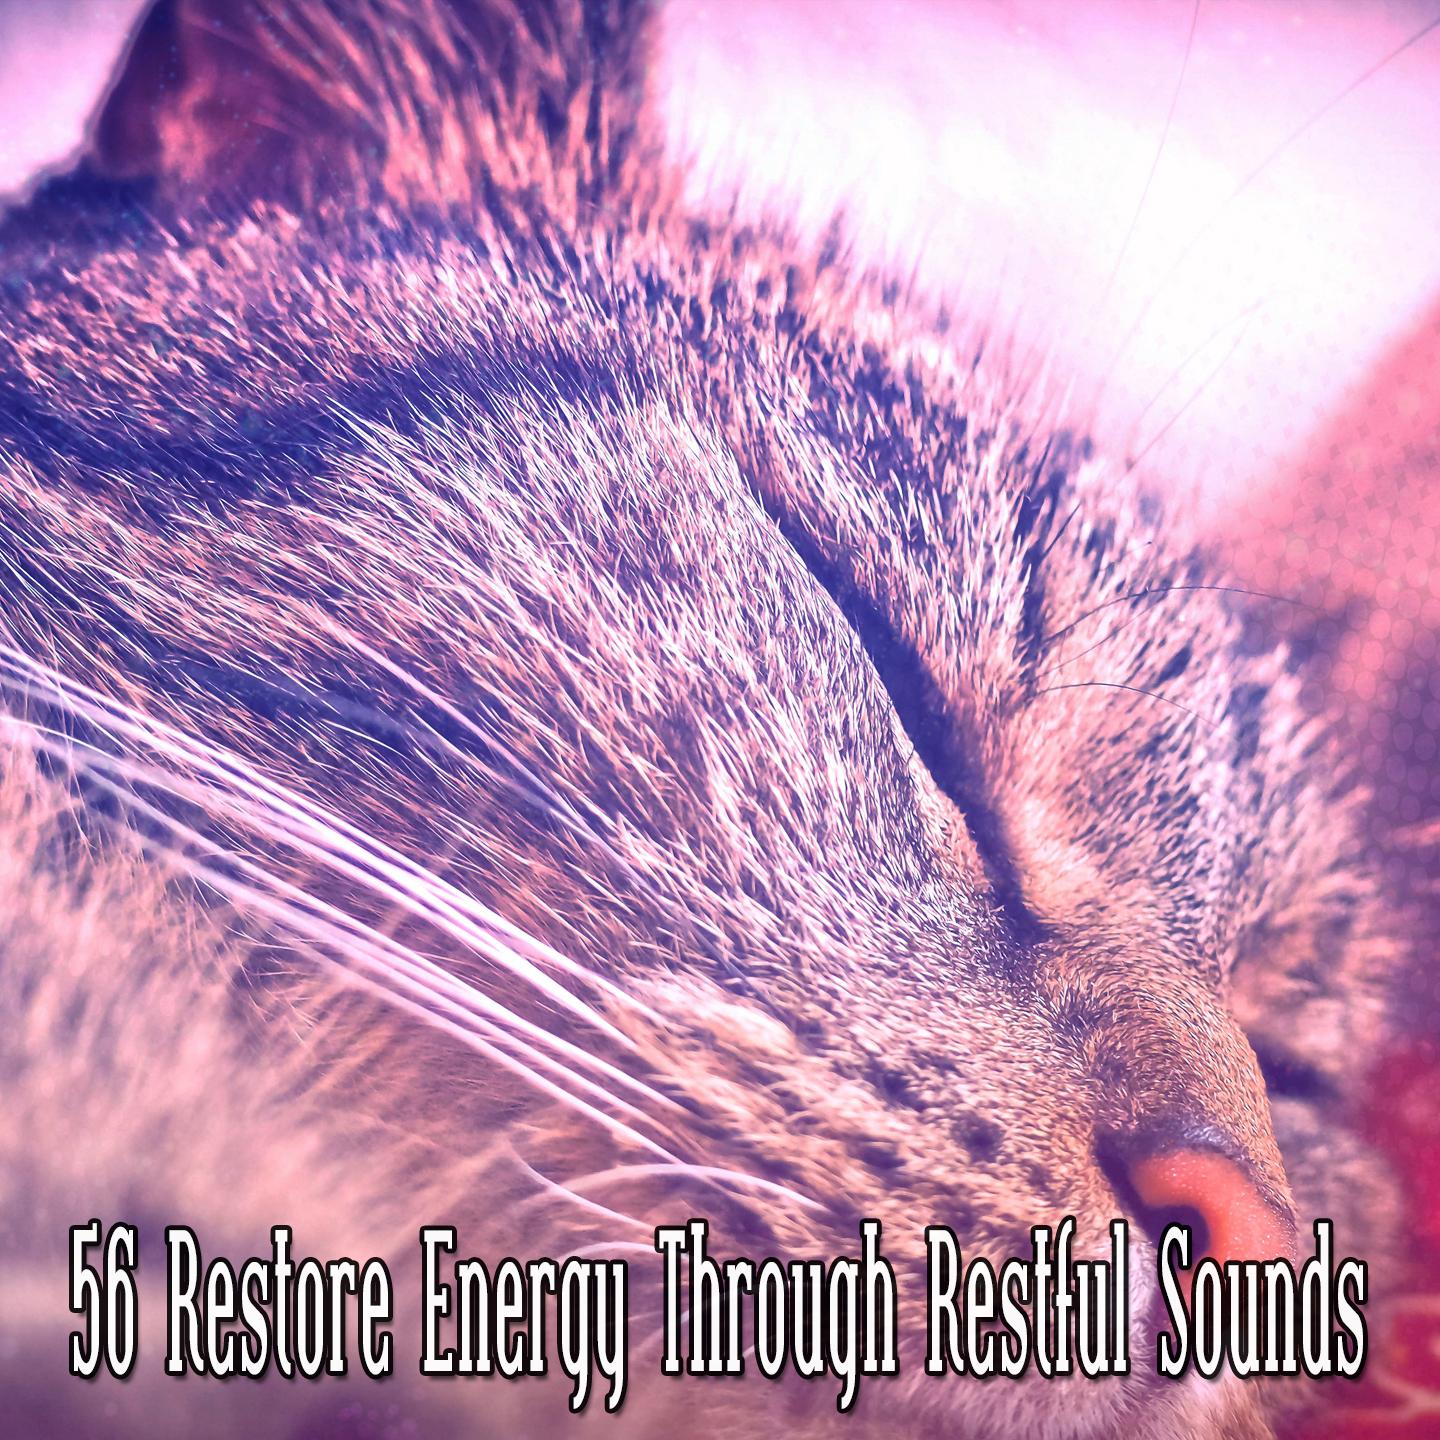 56 Restore Energy Through Restful Sounds